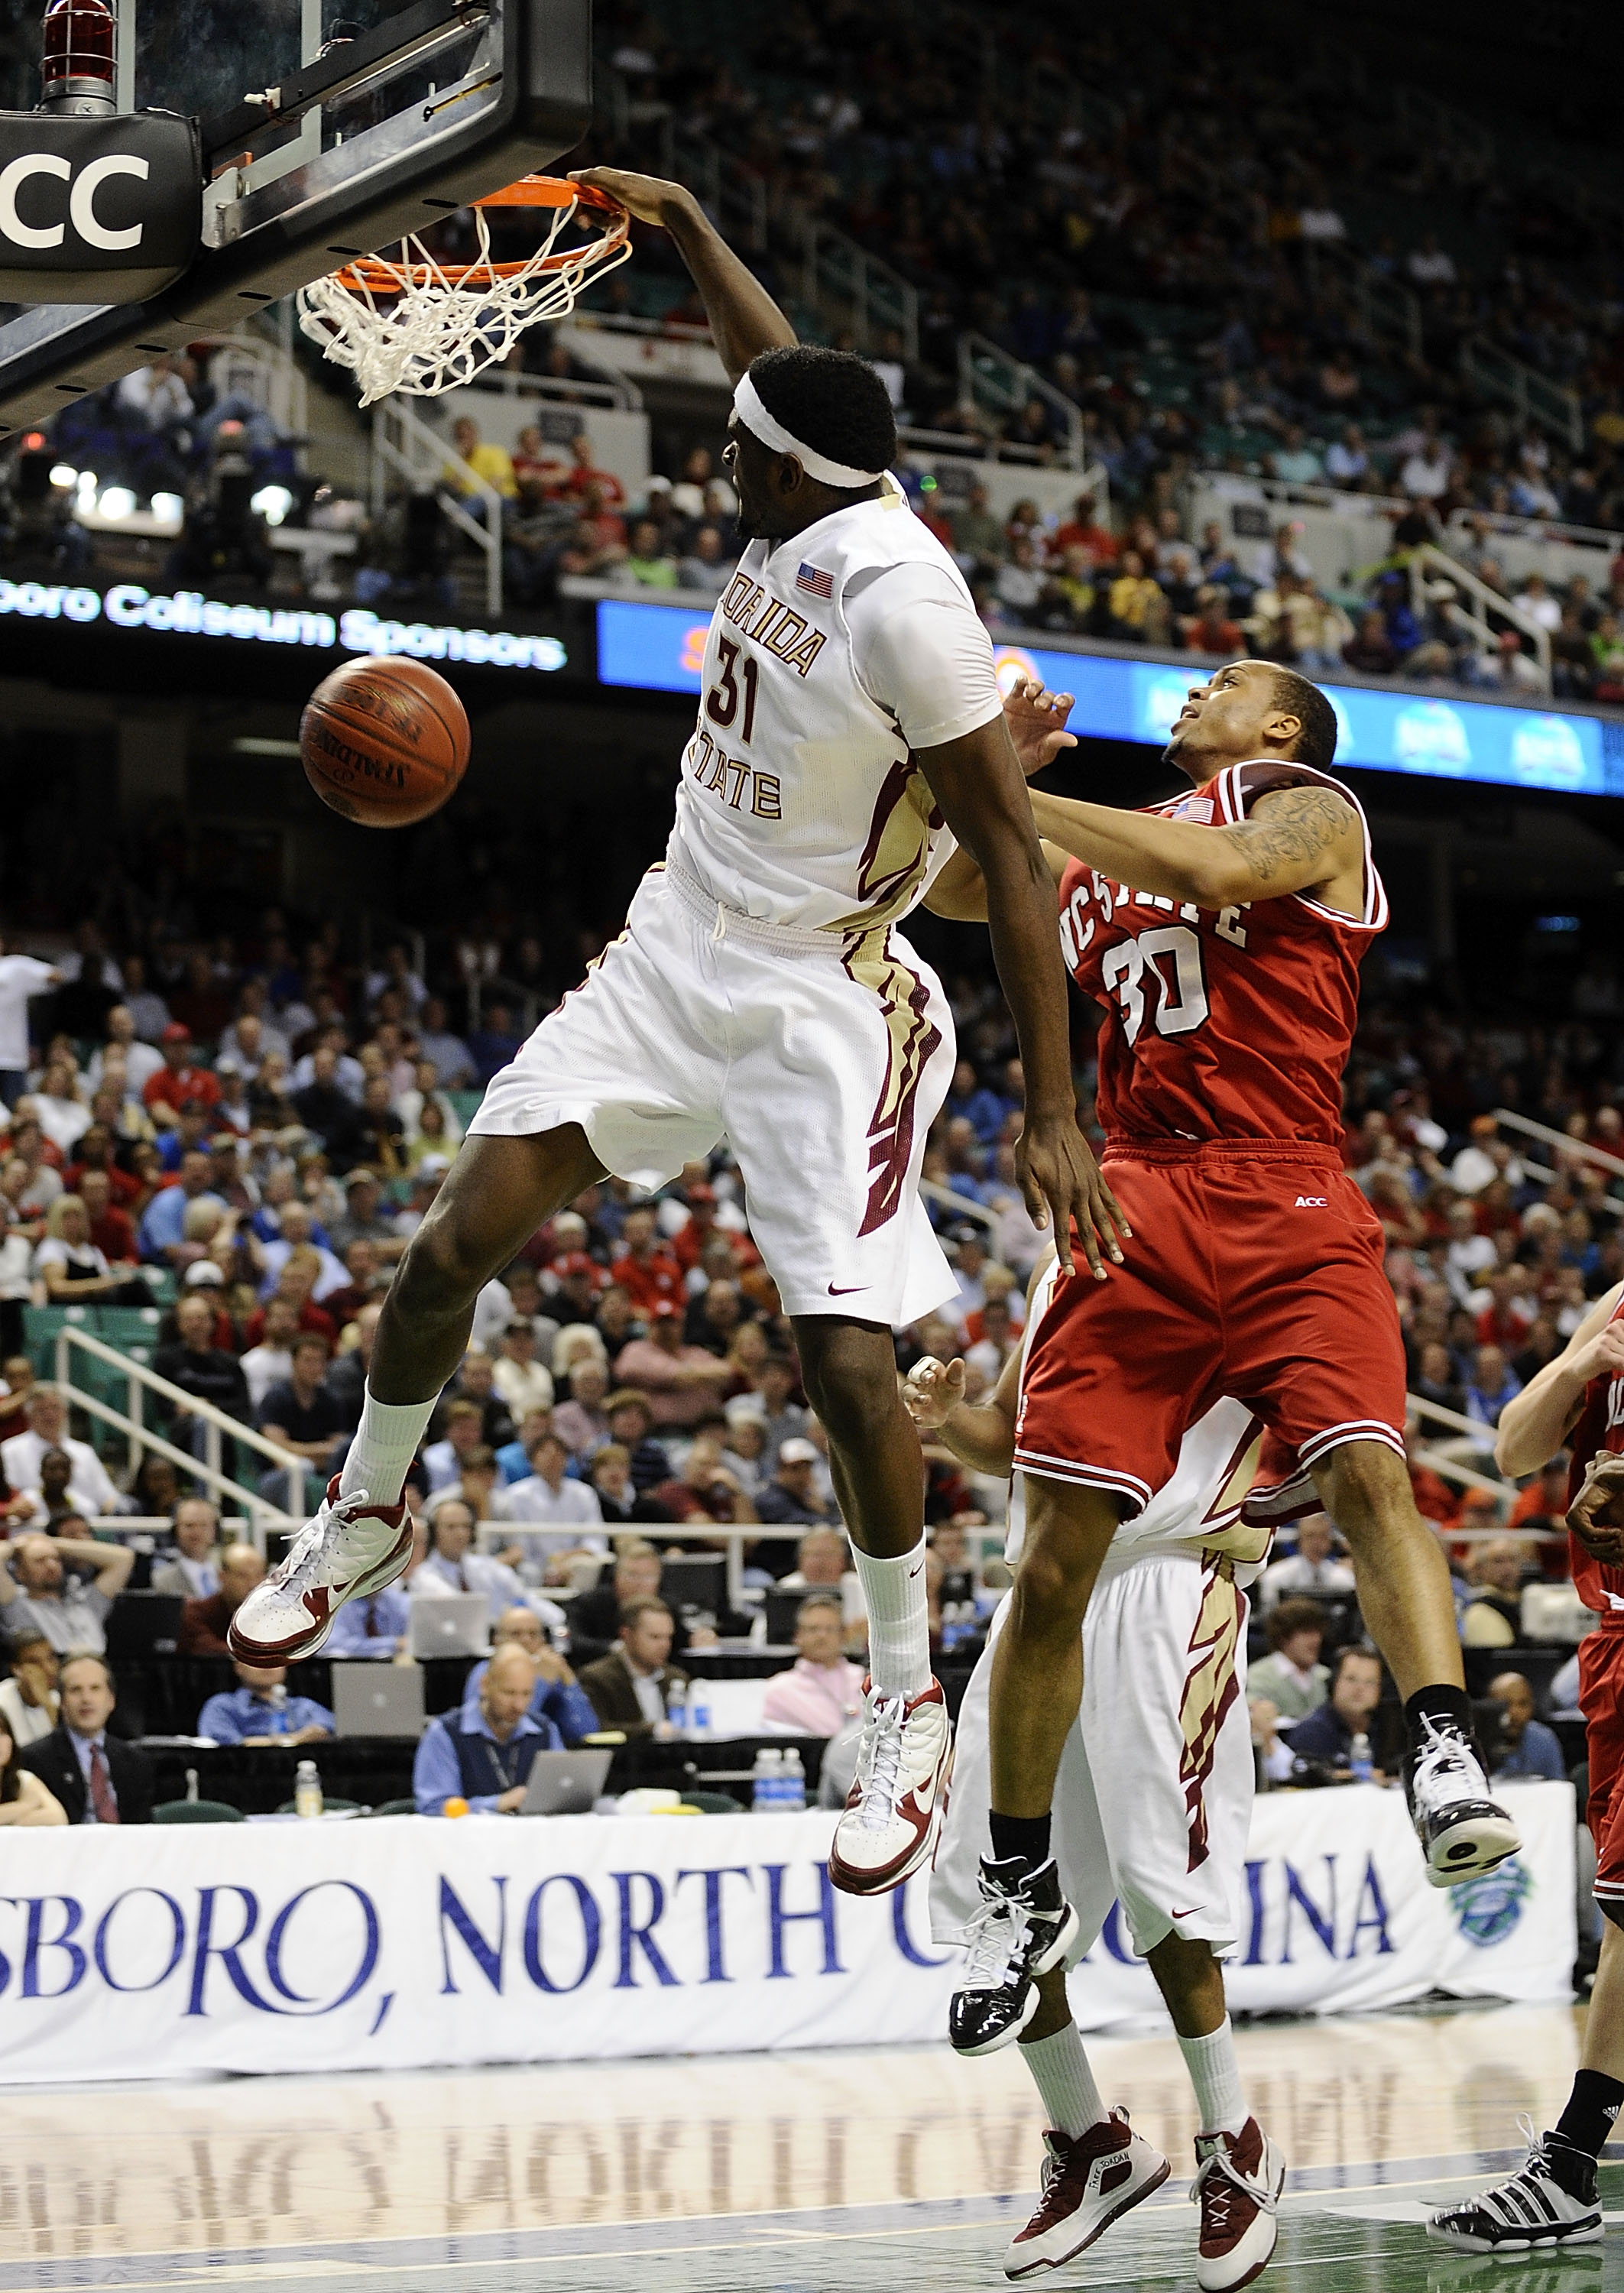 GREENSBORO, NC - MARCH 12:  Chris Singleton #31 of the Florida State Seminoles dunks in front of Johnny Thomas #30 of the North Carolina State Wolfpack in their quarterfinal game in the 2010 ACC Men's Basketball Tournament at the Greensboro Coliseum on Ma